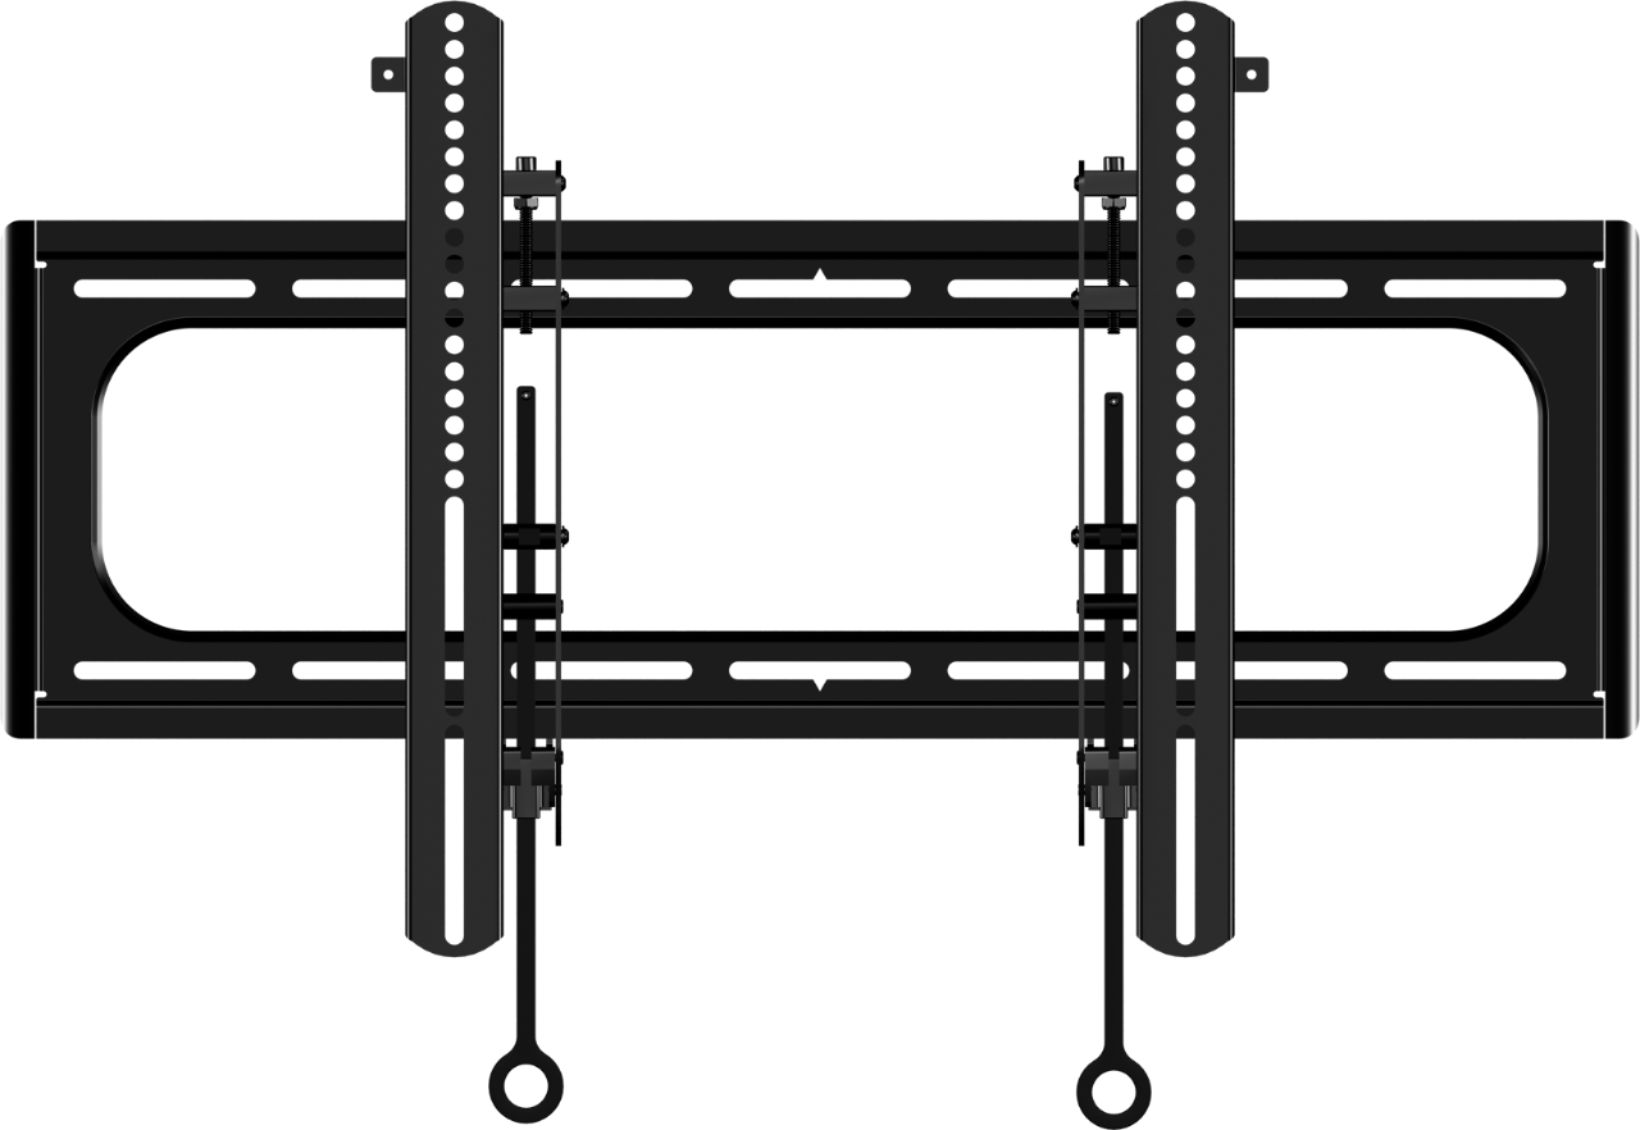 Sanus - Fixed TV Wall Mount for Most 65" - 95" Flat-Panel TVs - Black